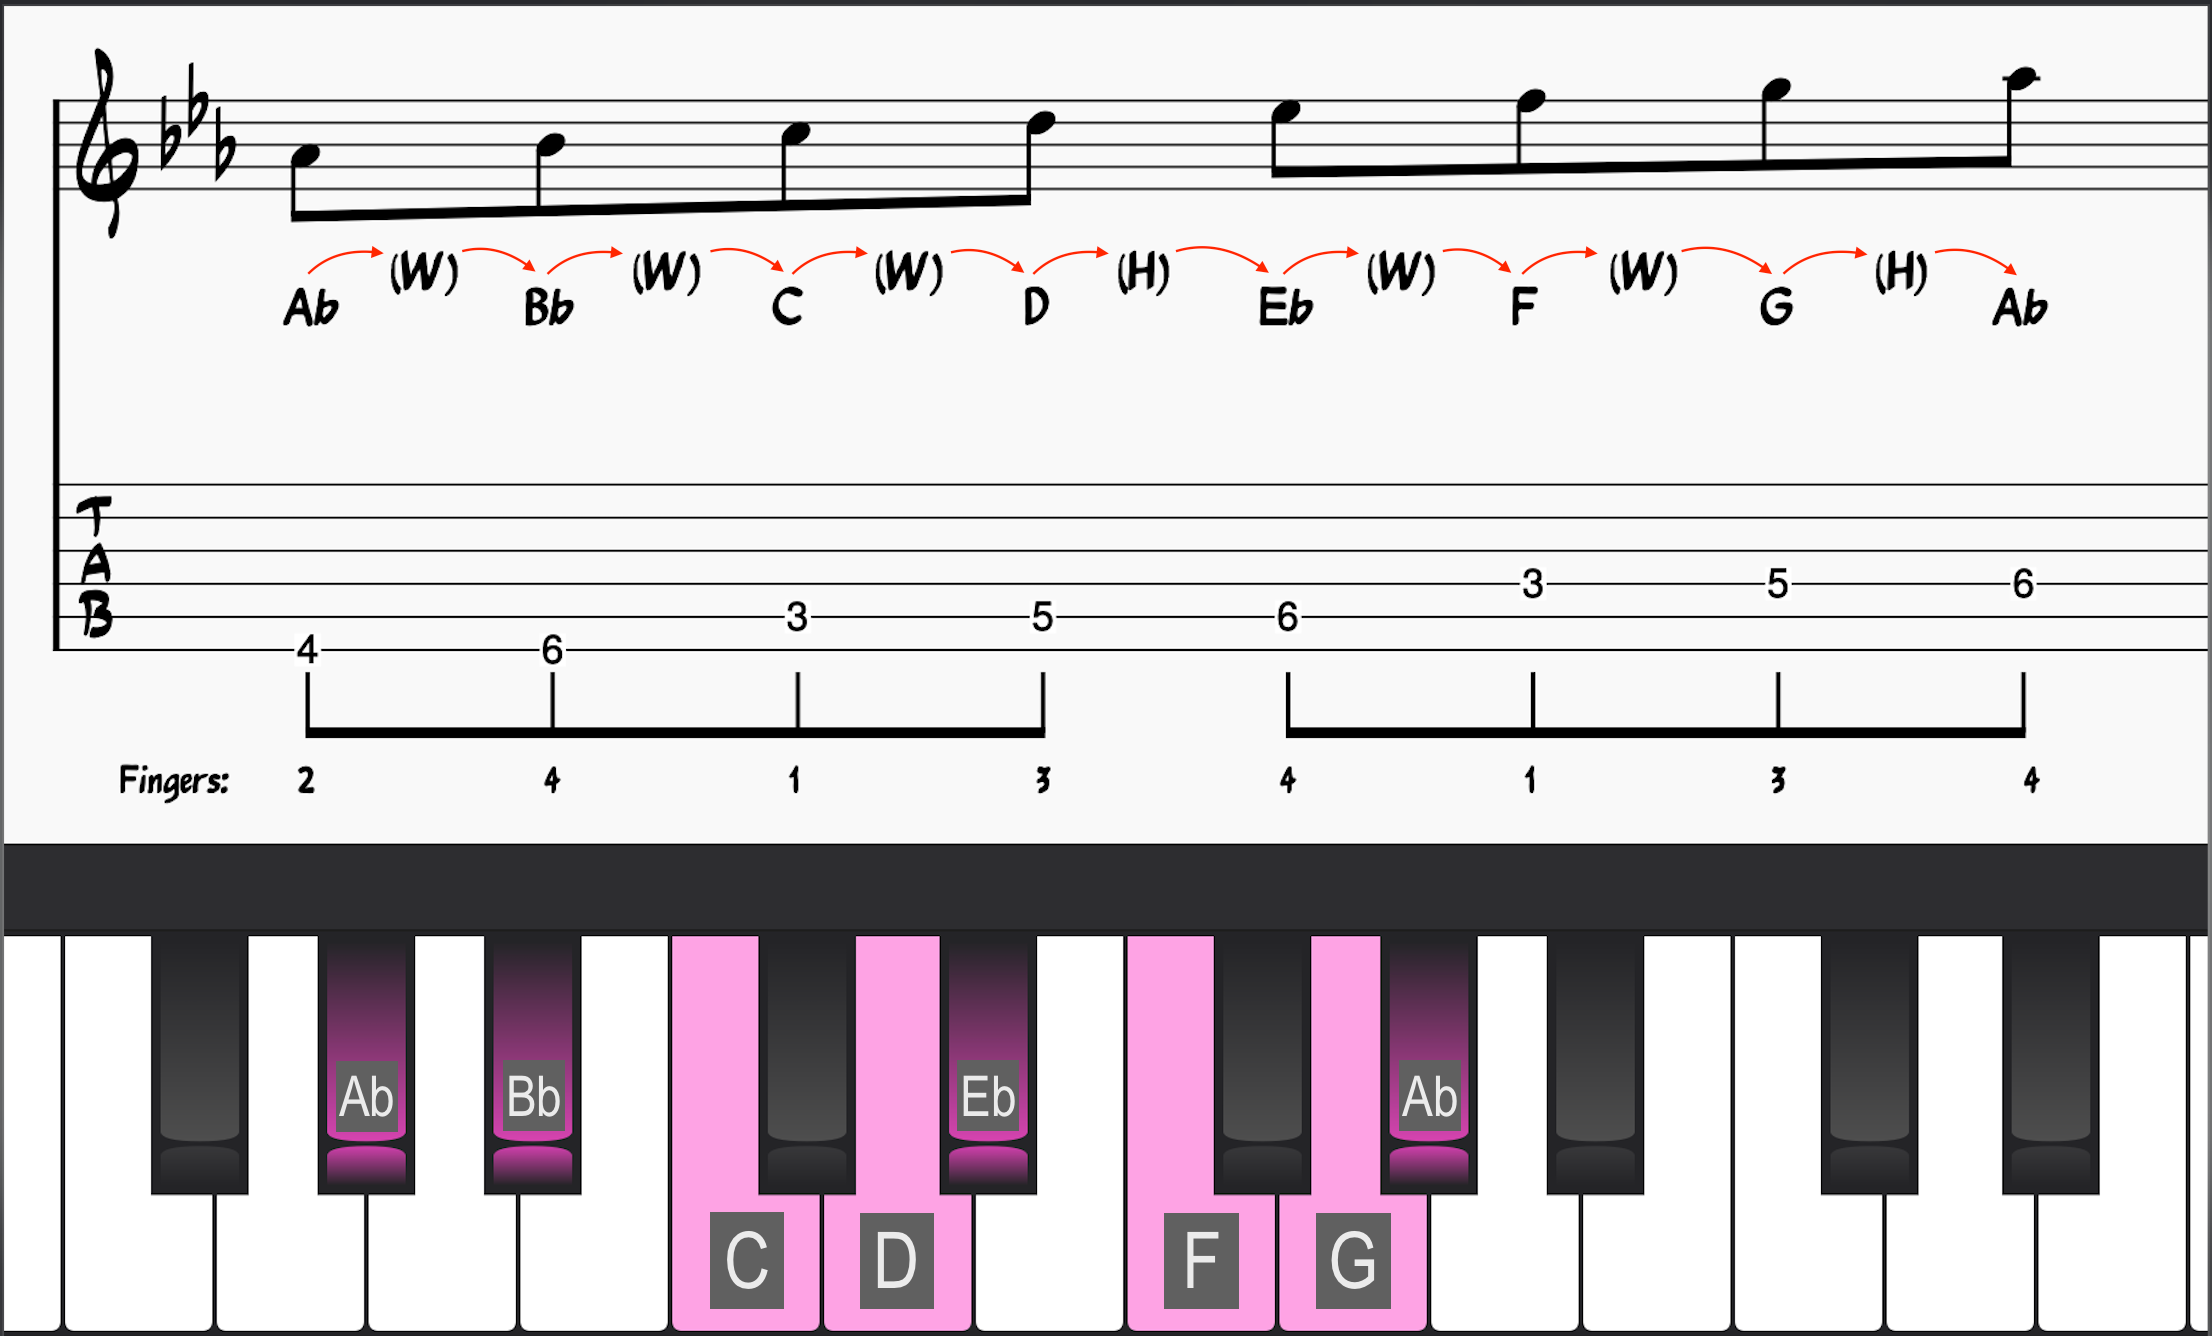 Ab Lydian Mode on Guitar and Piano